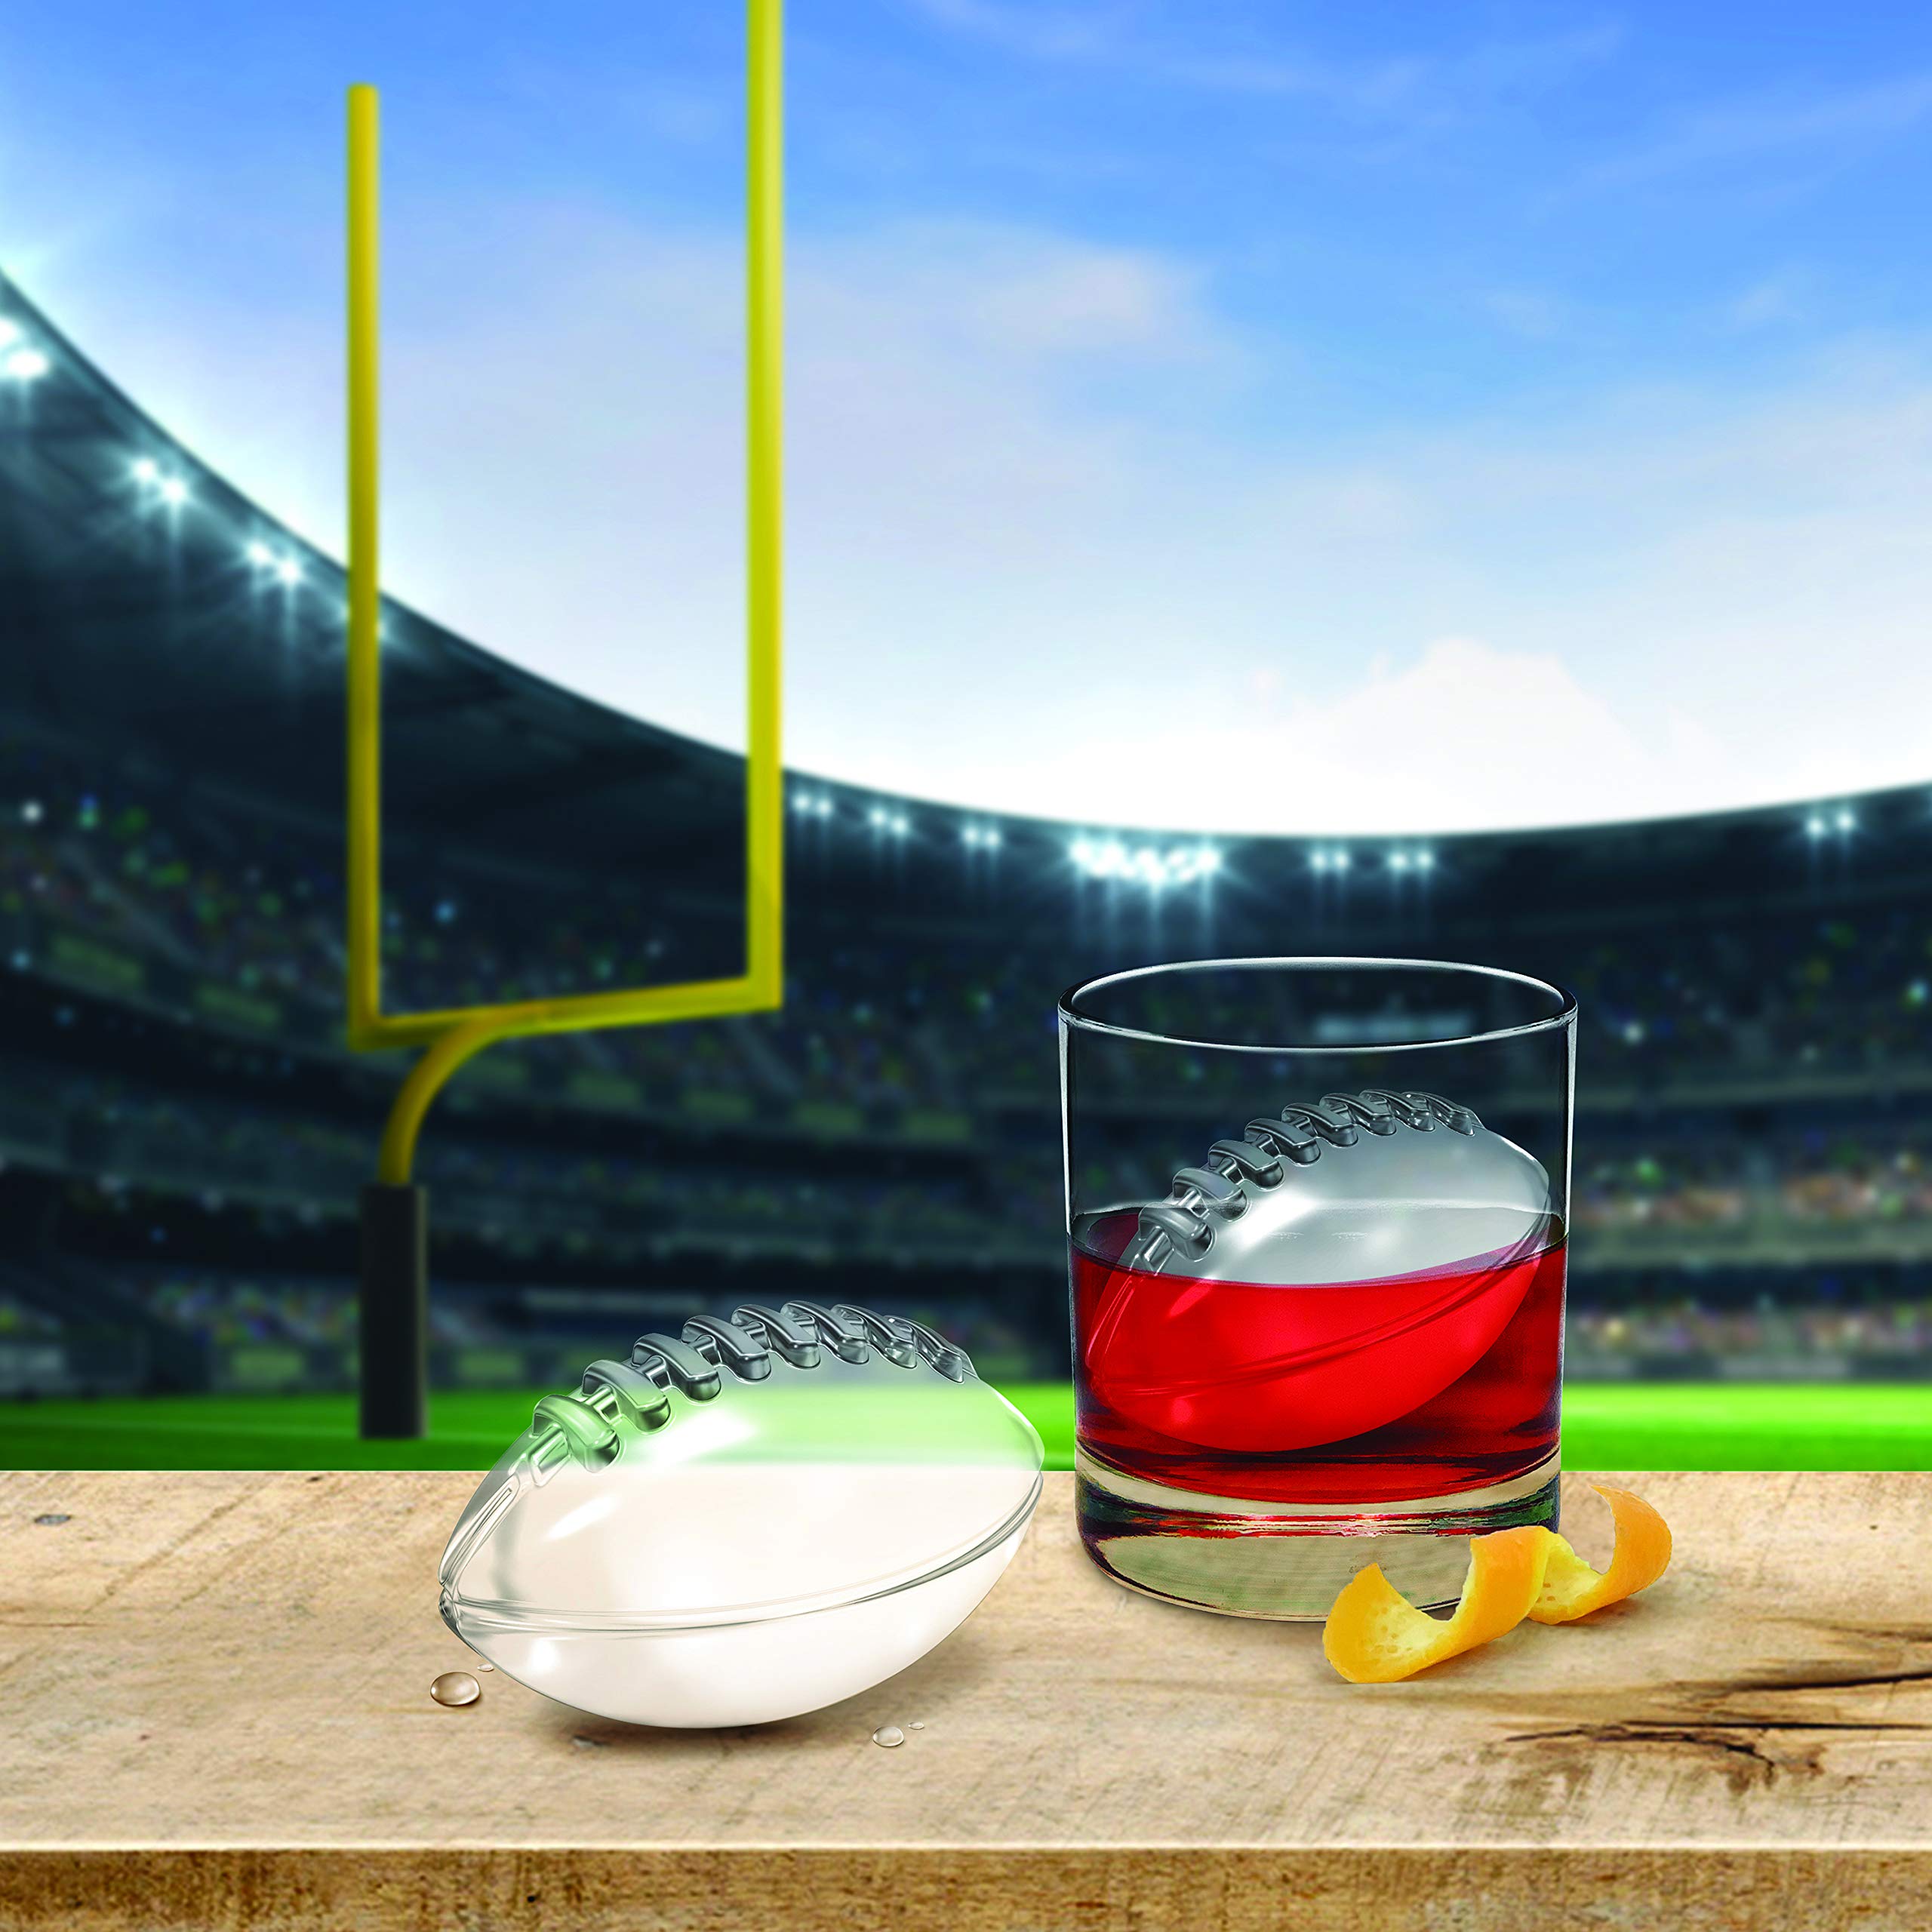 Tovolo Football Ice Molds (Set of 2) - Slow-Melting, Leak-Free, Reusable, & BPA-Free Craft Ice Molds For Game Day / Great For Whiskey, Cocktails, Coffee, Soda, Fun Drinks, And Gifts